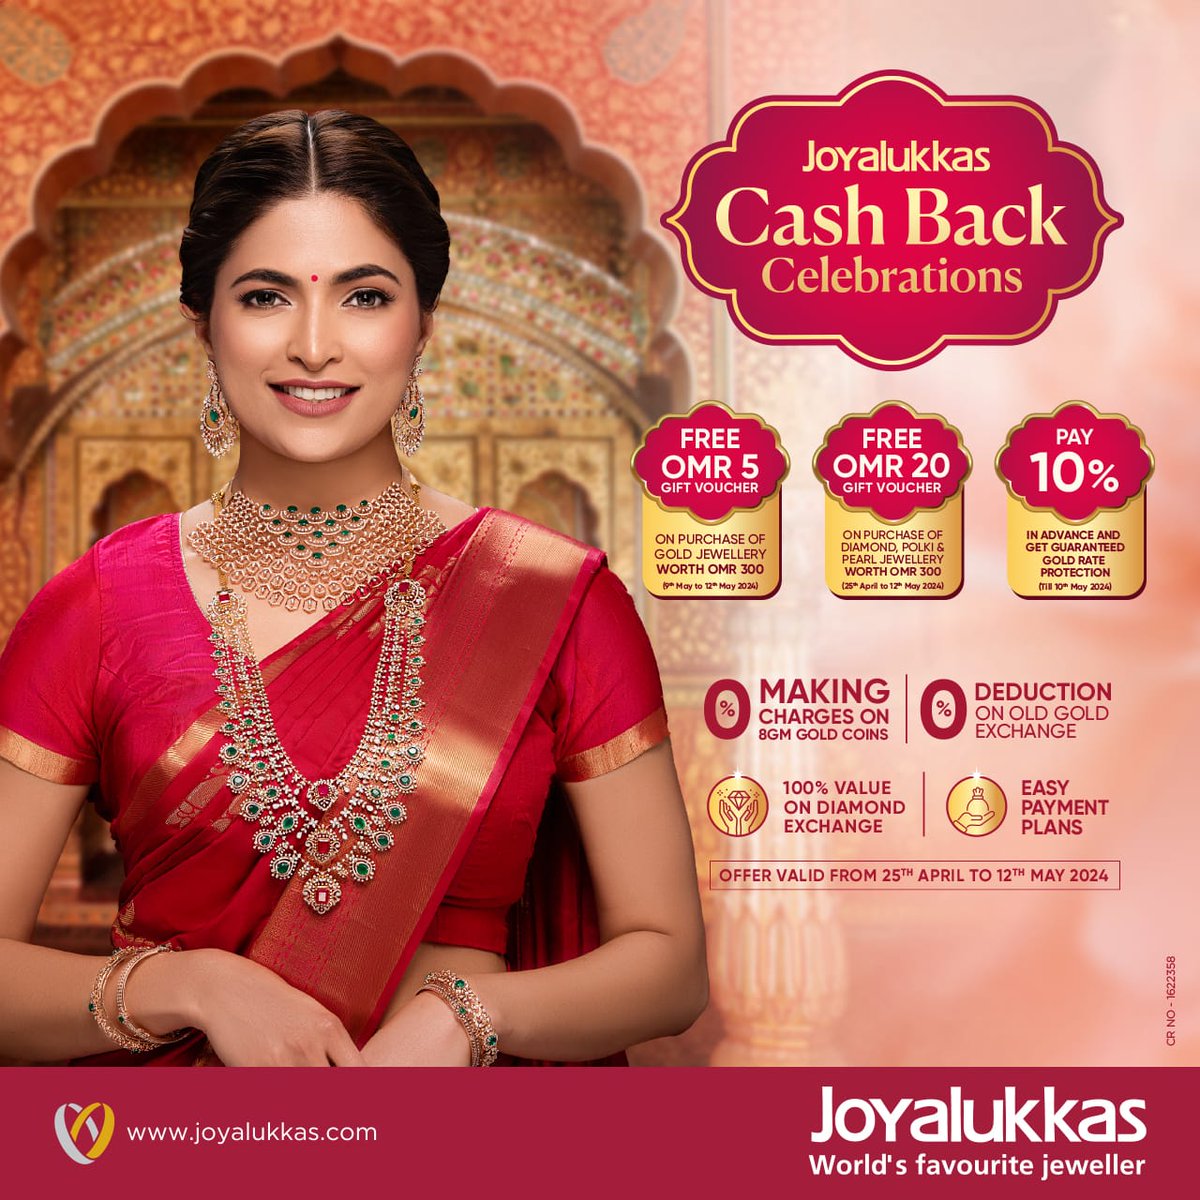 Sponsored Content :

Joyalukkas Cashback Celebrations is here!

Buy jewellery worth OMR 300 and get free gift vouchers. Pay 10% advance and get guaranteed gold rate protection. Buy 8 gm gold coins at 0% making charges. Also enjoy 0% deduction on old gold exchange. 

To know more